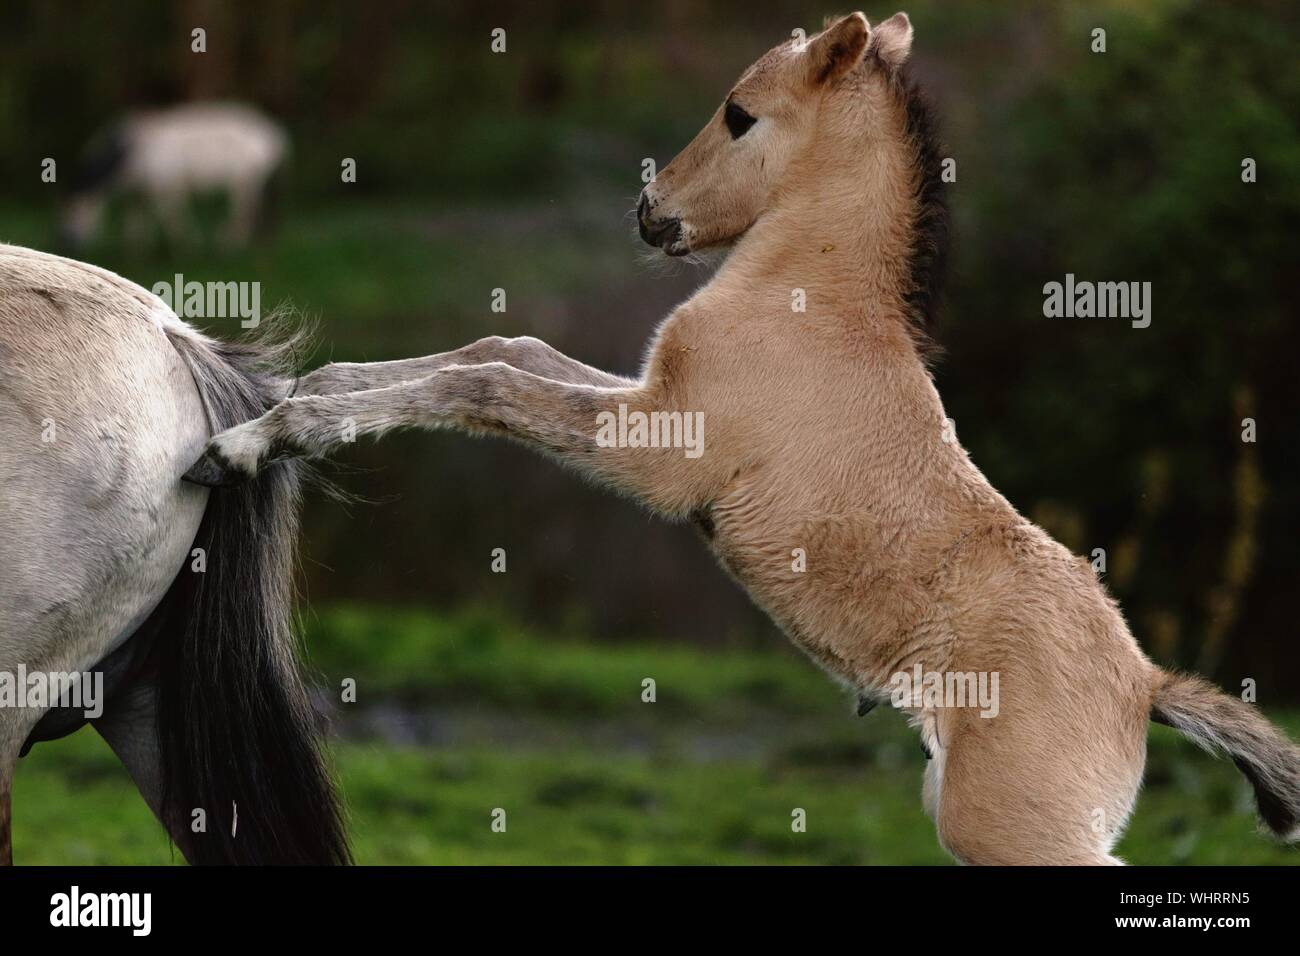 Close-up Of Young Animal Rearing Up On Horse At Field Stock Photo